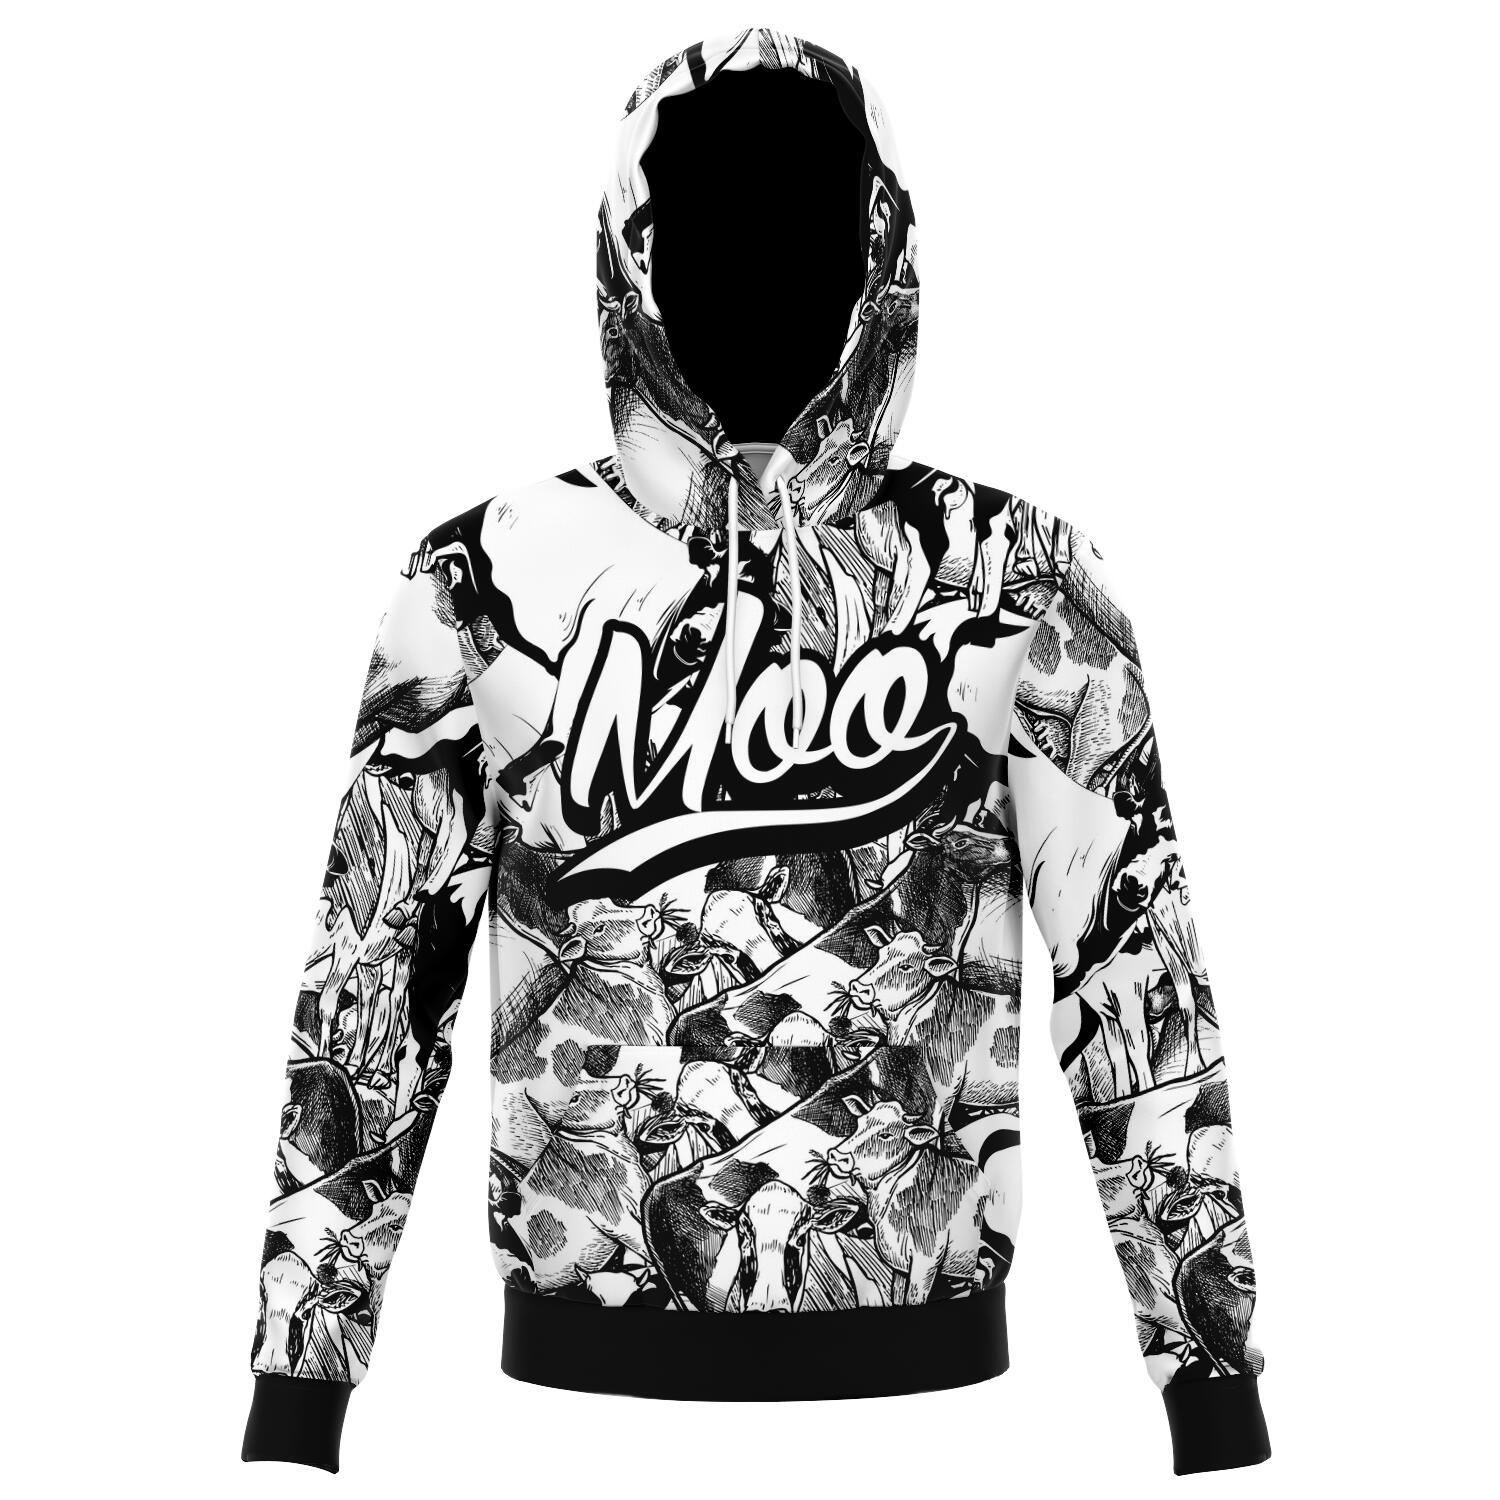 Moo Cow Hoodie CL1211 XS Official COW PRINT Merch